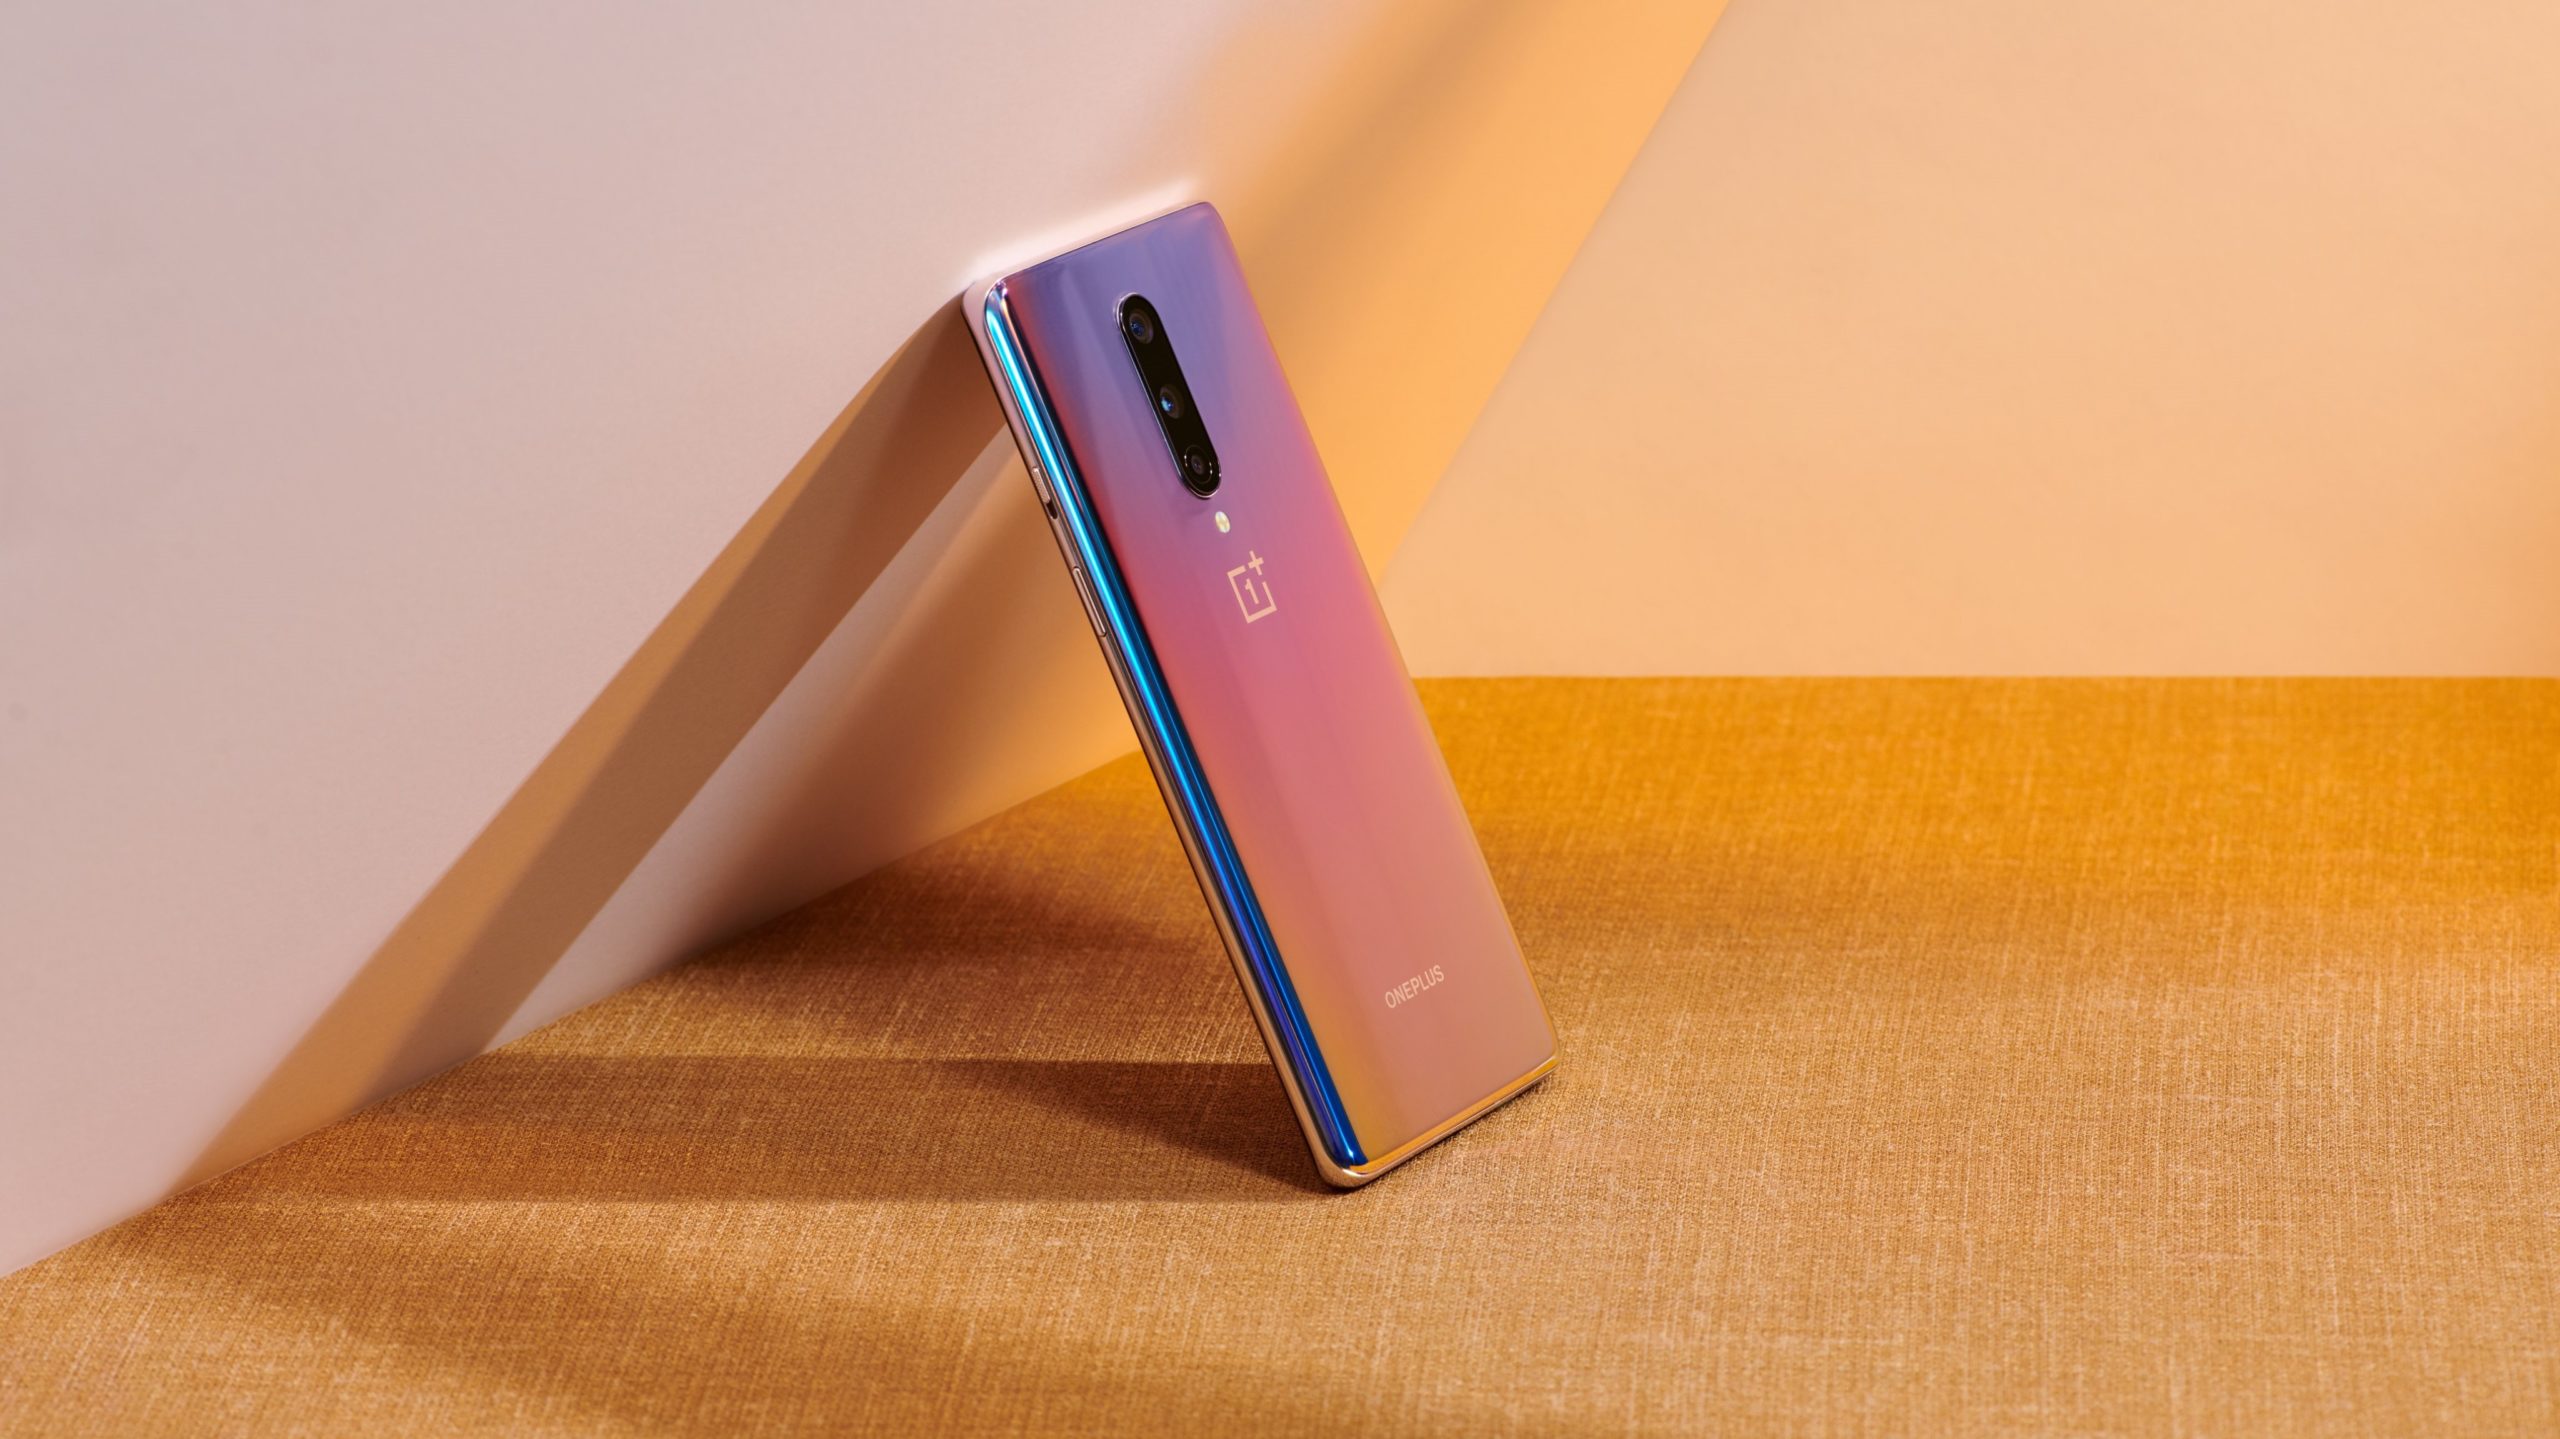 OnePlus 8T Smartphone Review in Hindi Price and Specifications Features Prosser RAM Storge Camera Battery Details Leaked!, कीमत स्पेसिफिकेशन और फीचर्स की जानकारी लीक हुई